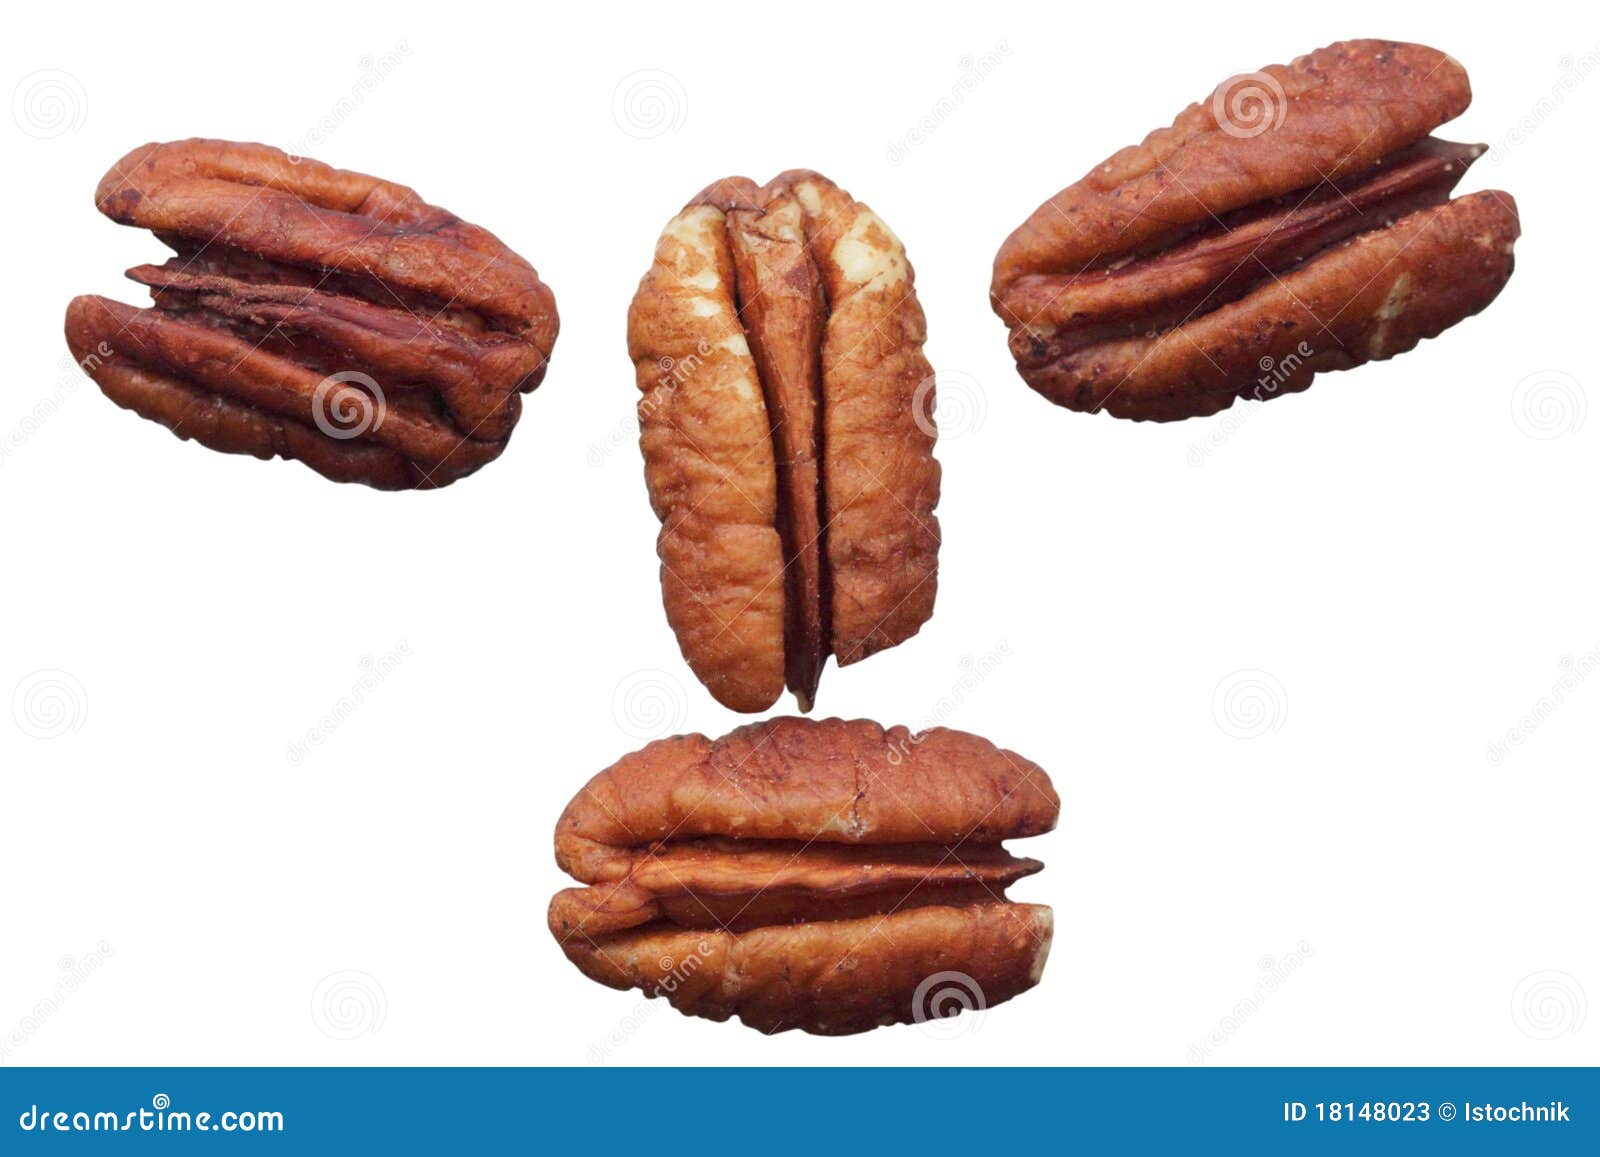 purified pecans